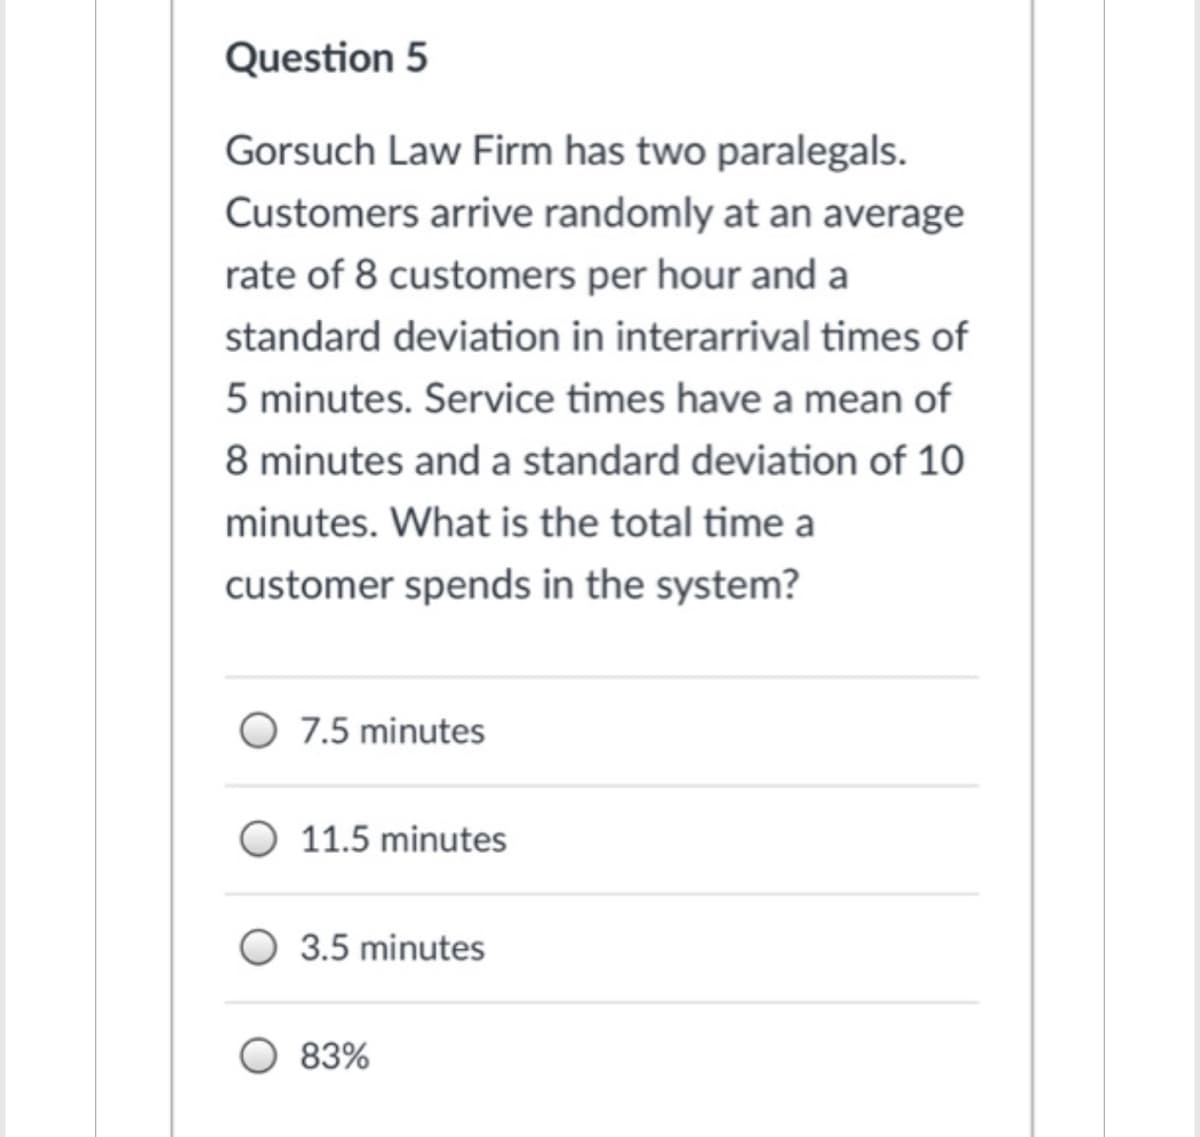 Question 5
Gorsuch Law Firm has two paralegals.
Customers arrive randomly at an average
rate of 8 customers per hour and a
standard deviation in interarrival times of
5 minutes. Service times have a mean of
8 minutes and a standard deviation of 10
minutes. What is the total time a
customer spends in the system?
O 7.5 minutes
11.5 minutes
3.5 minutes
83%